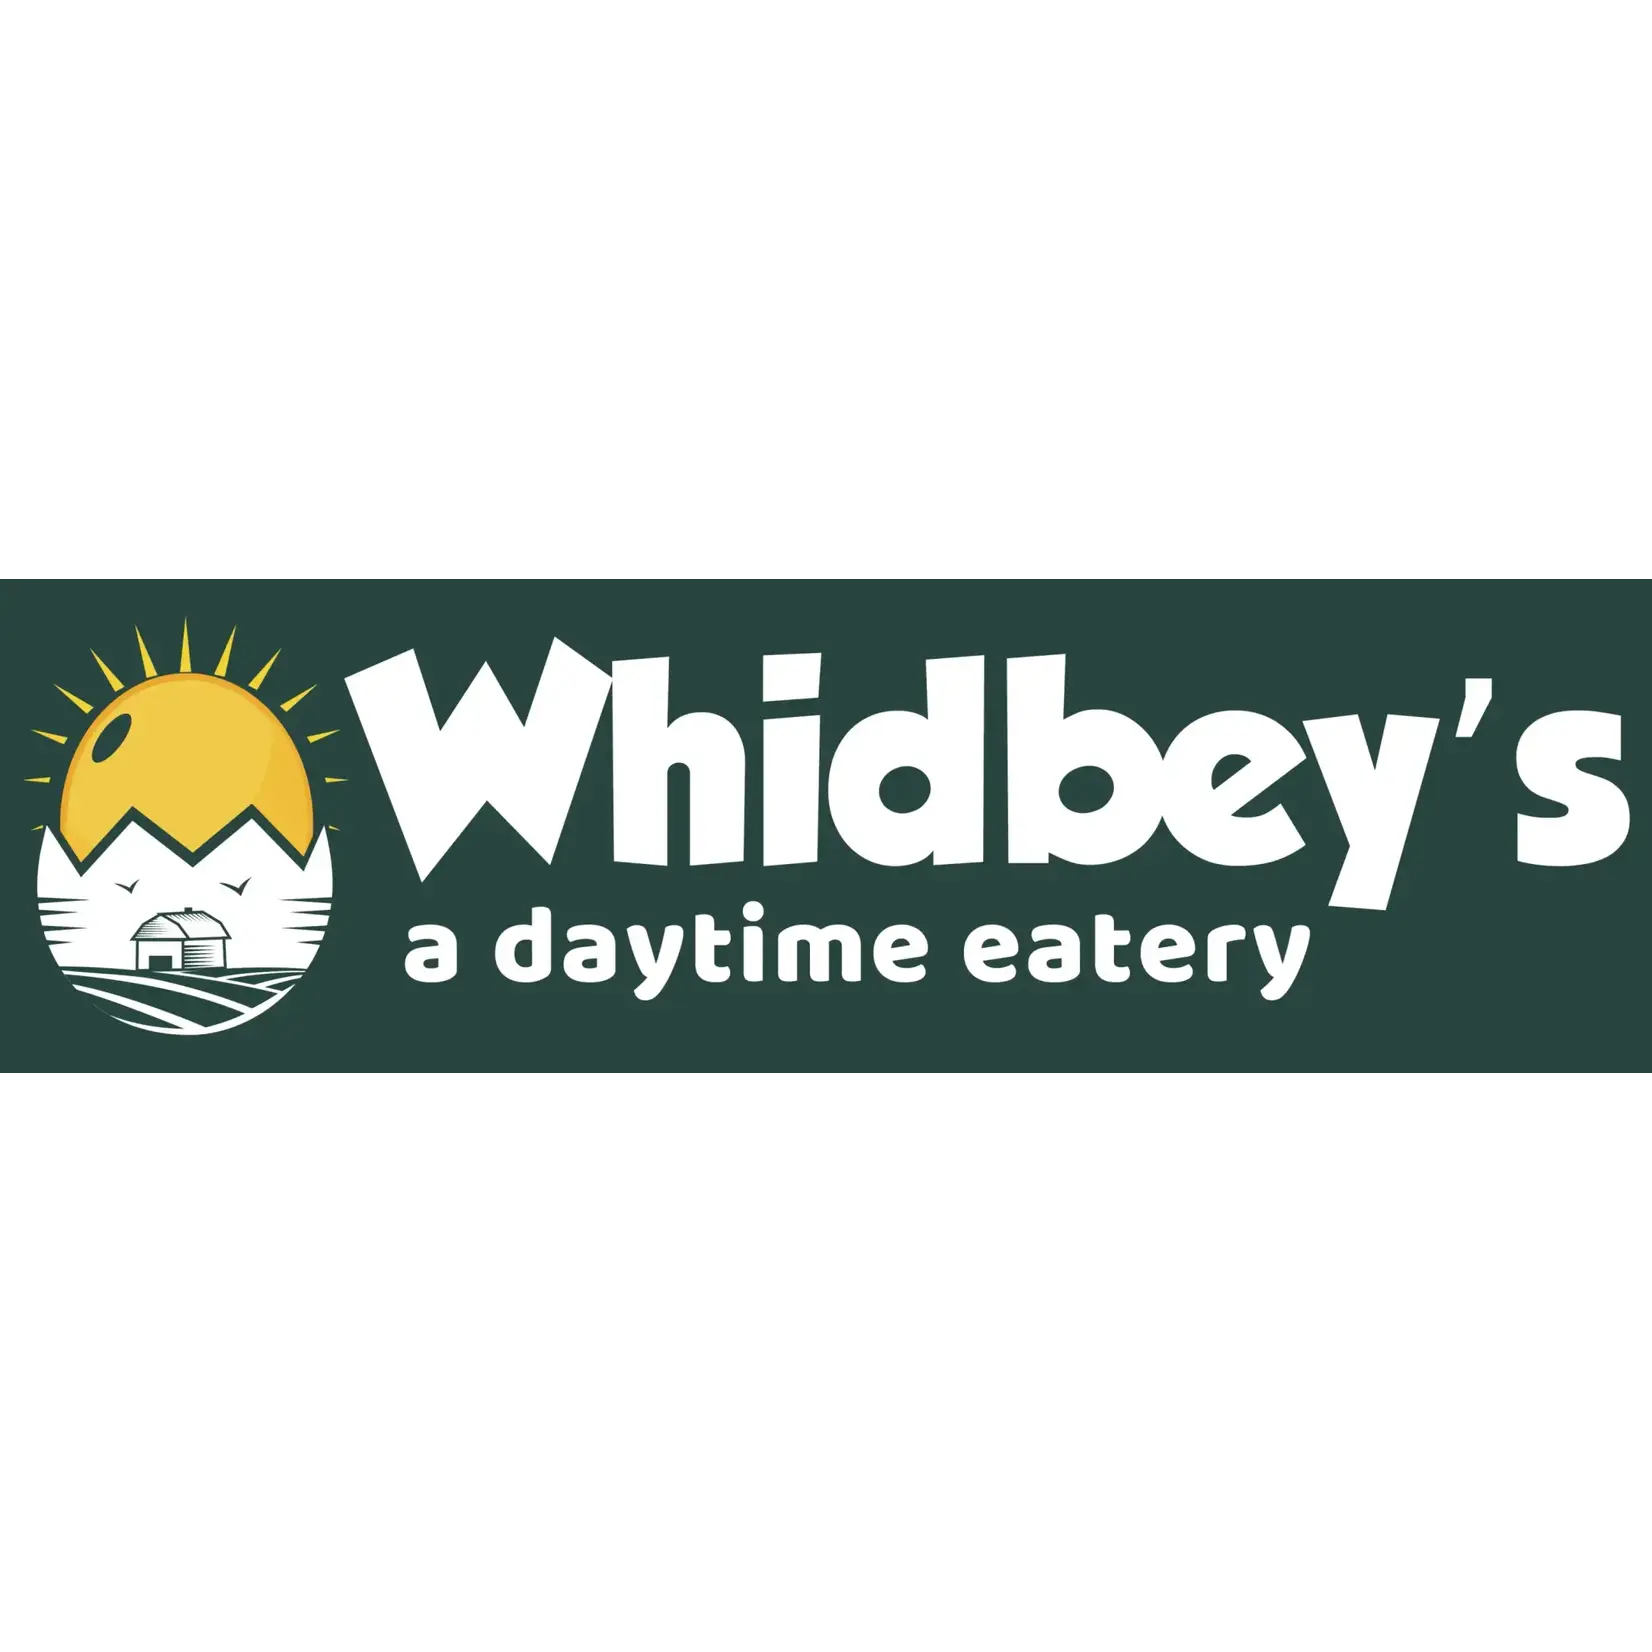 Whidbey’s a daytime eatery Whidbey’s a daytime eatery - $25 Value Menu Items